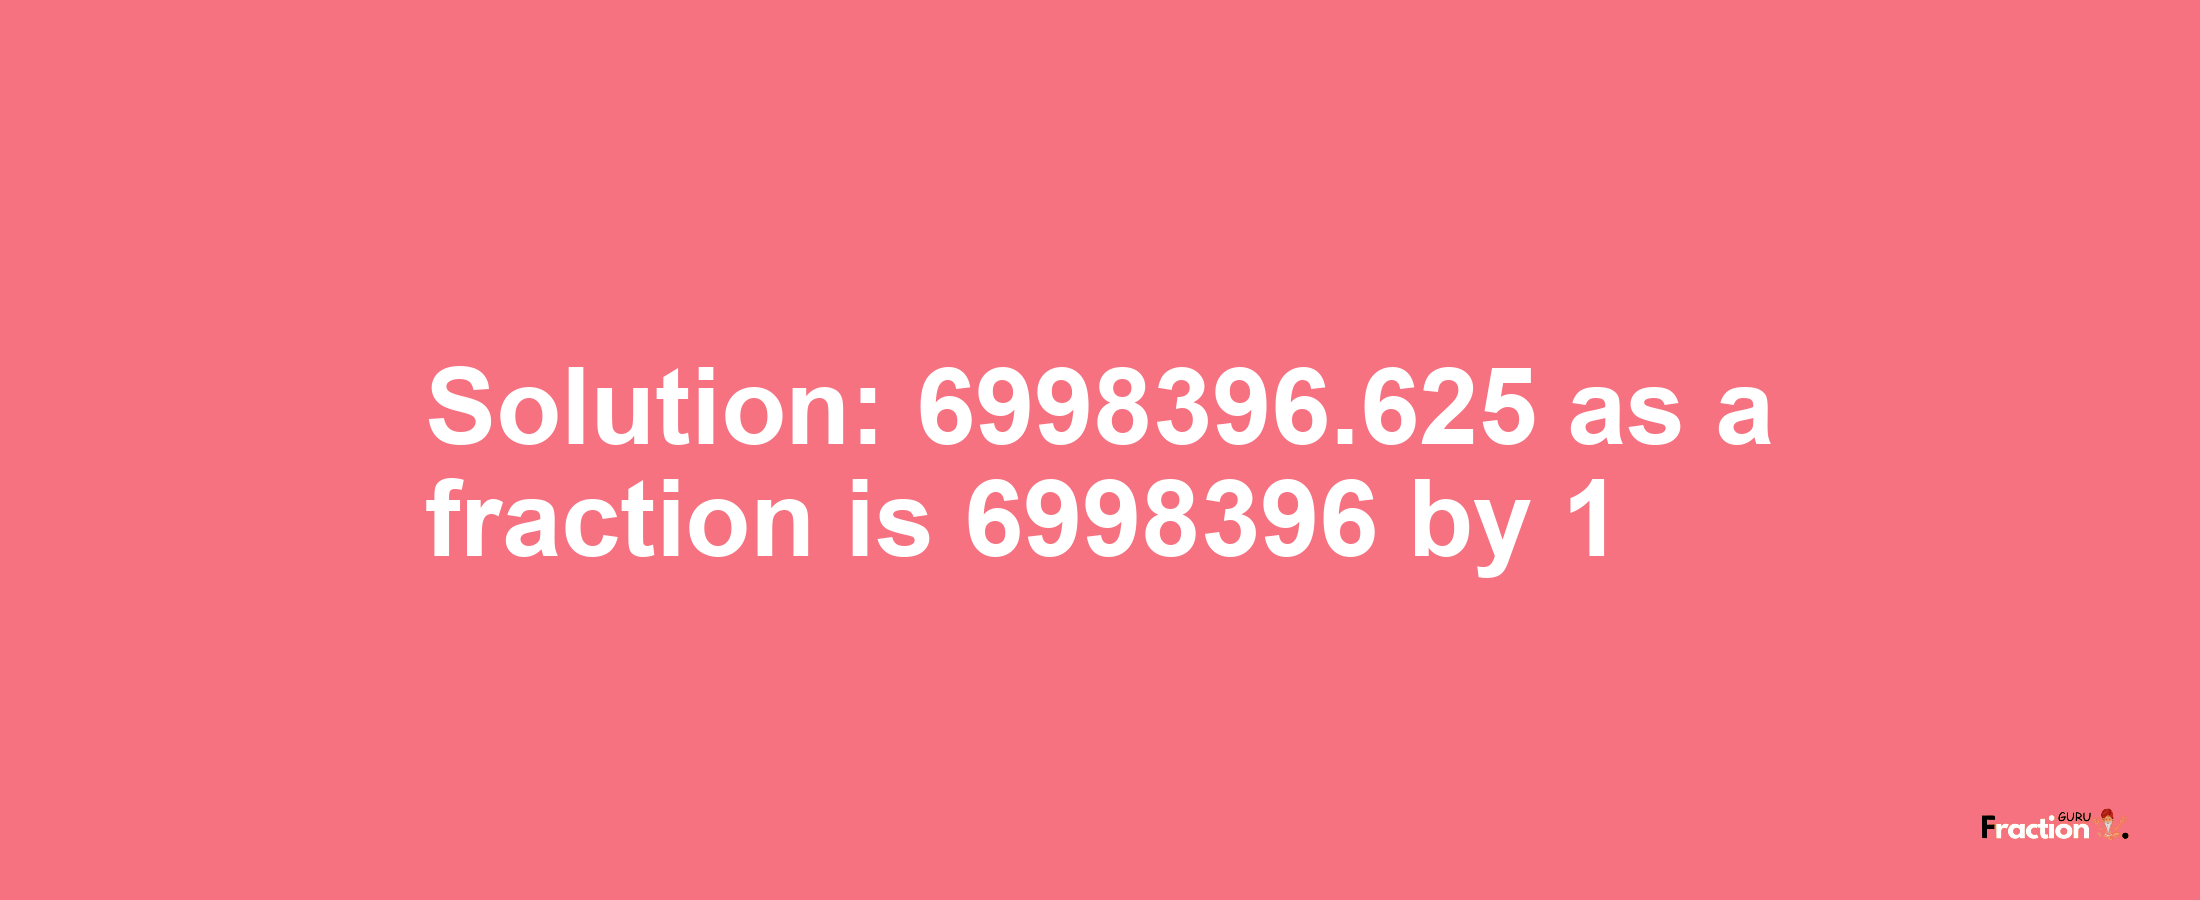 Solution:6998396.625 as a fraction is 6998396/1